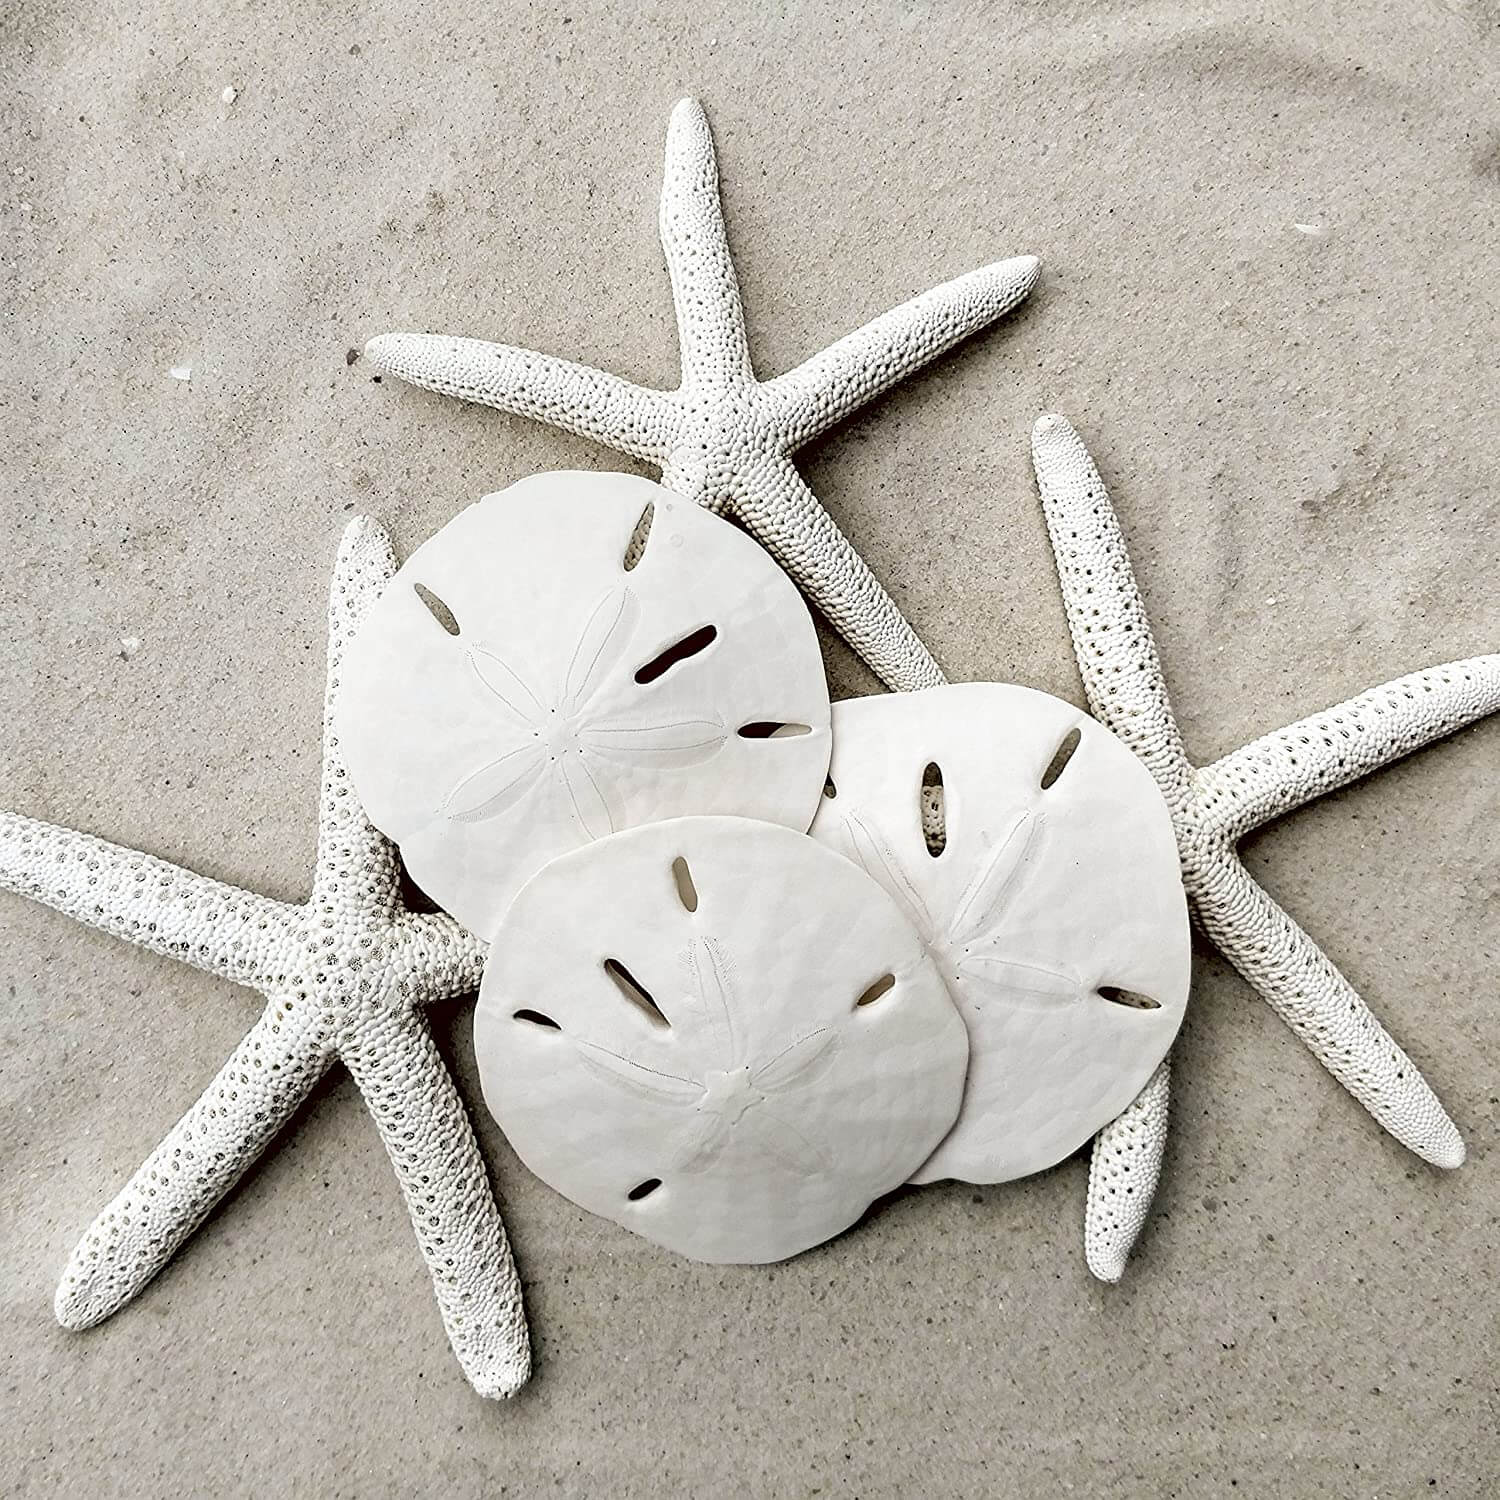 Starfish and Sand Dollars for Crafts -3 Finger Starfish 4 to 6 inch and 3 Sand Dollars 3 to 3.5 inch